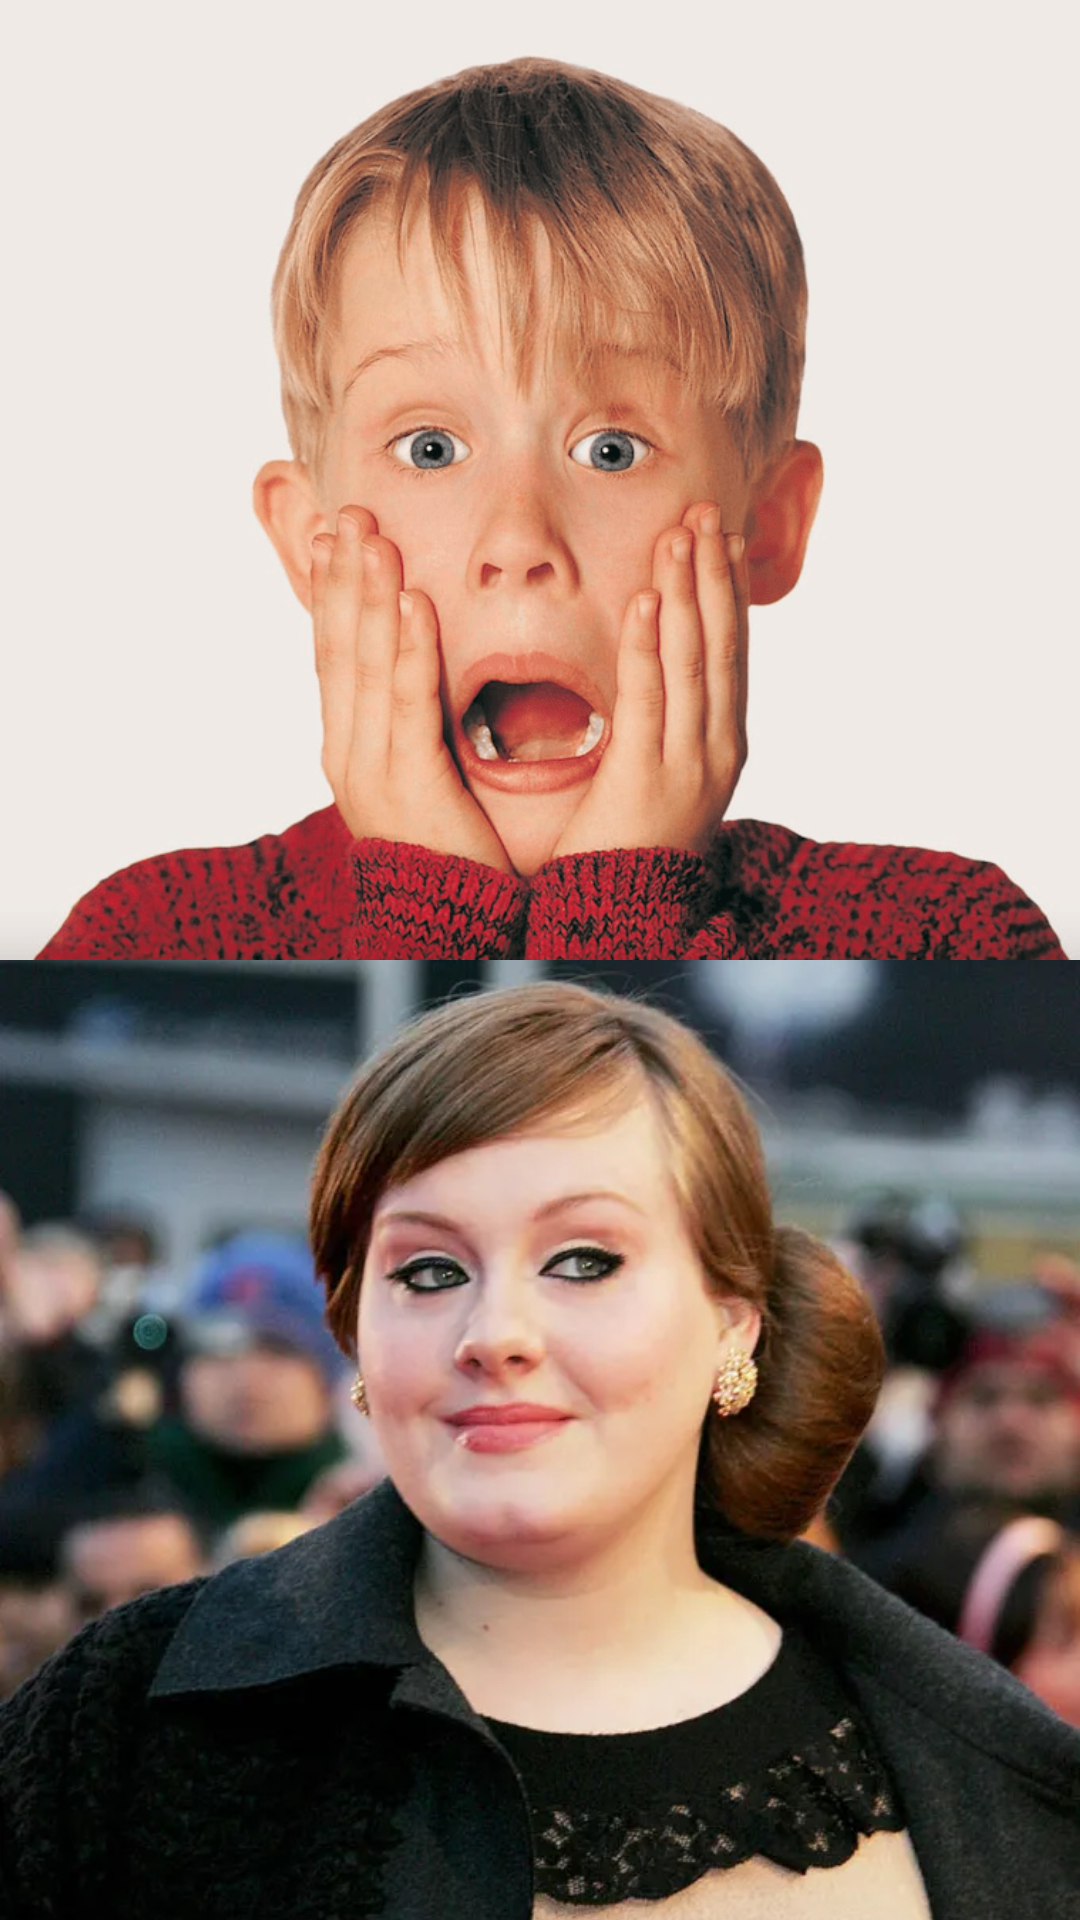 Home Alone's Macaulay Culkin to singer Adele: Popular Hollywood celebs shocking transformations